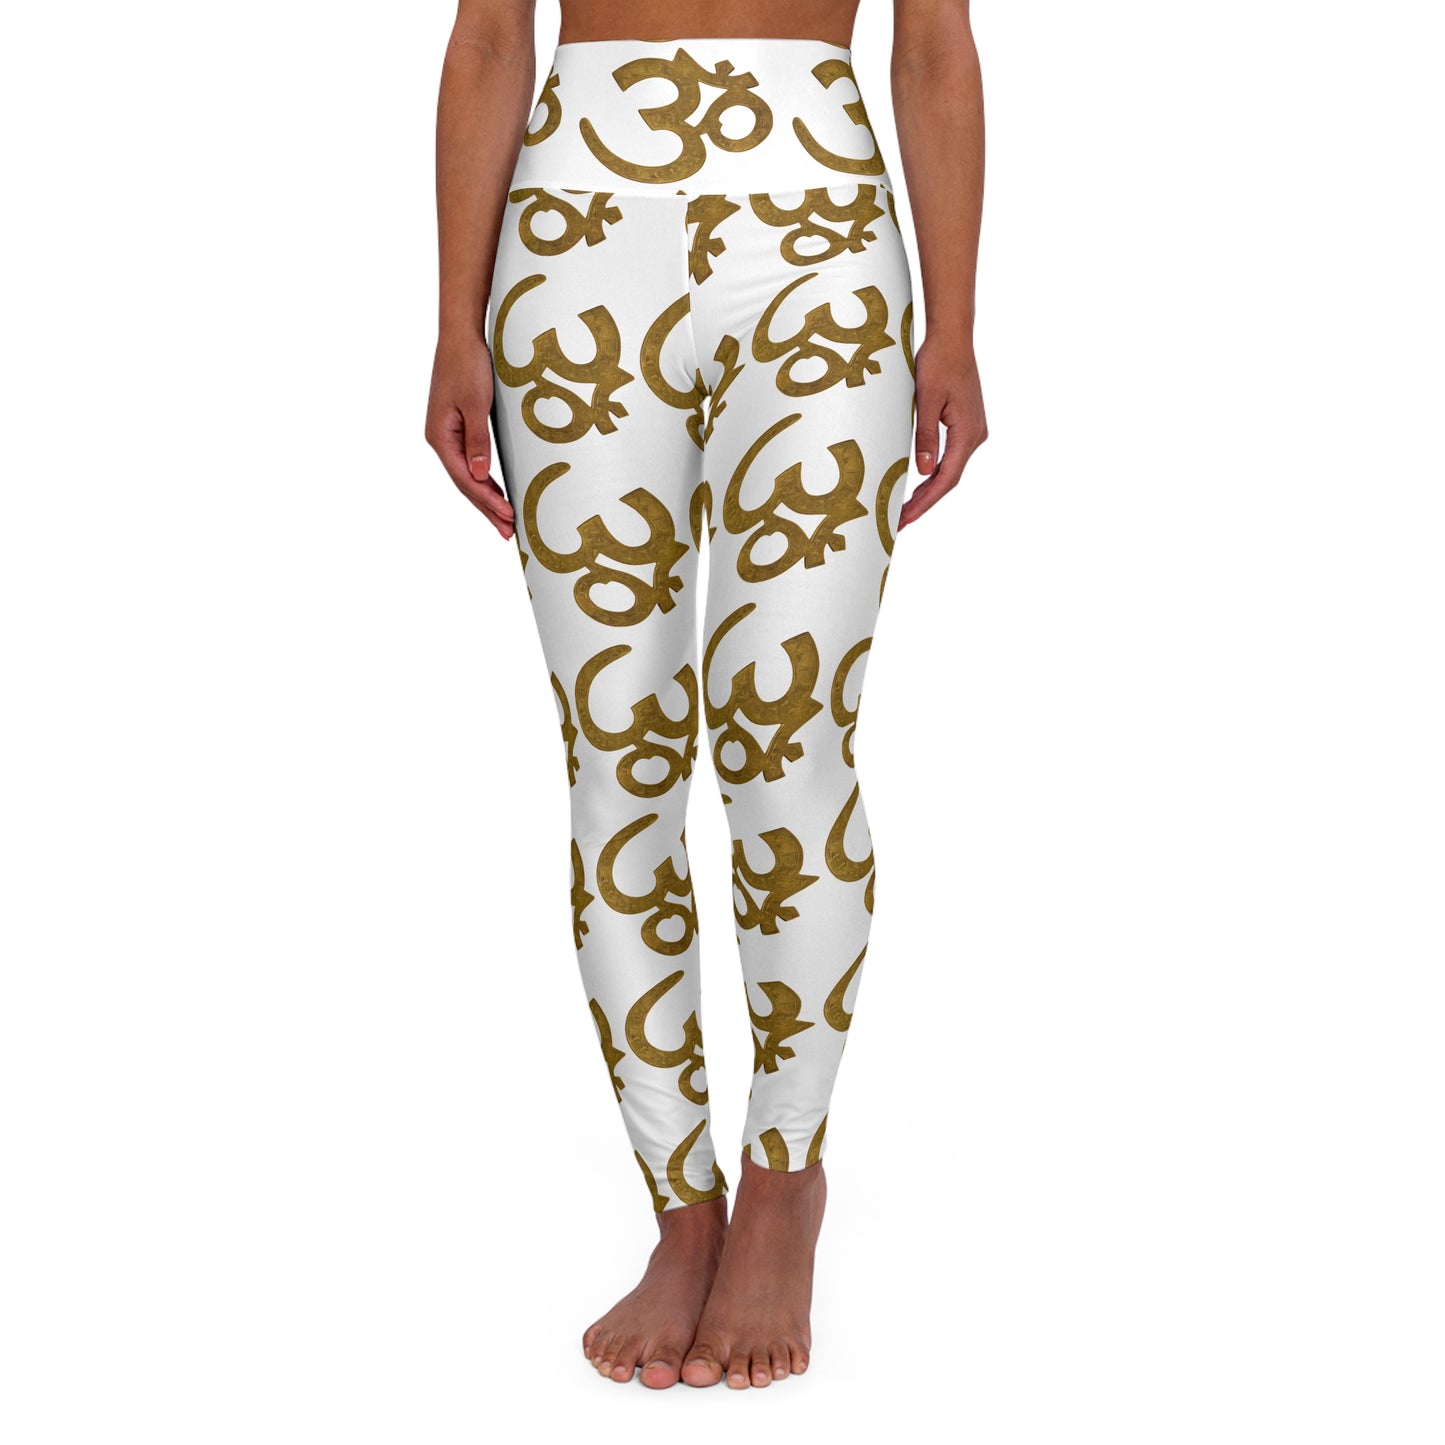 Gold OHM Skinny Fit High Waisted Yoga Leggings, Expertly Crafted in the USA